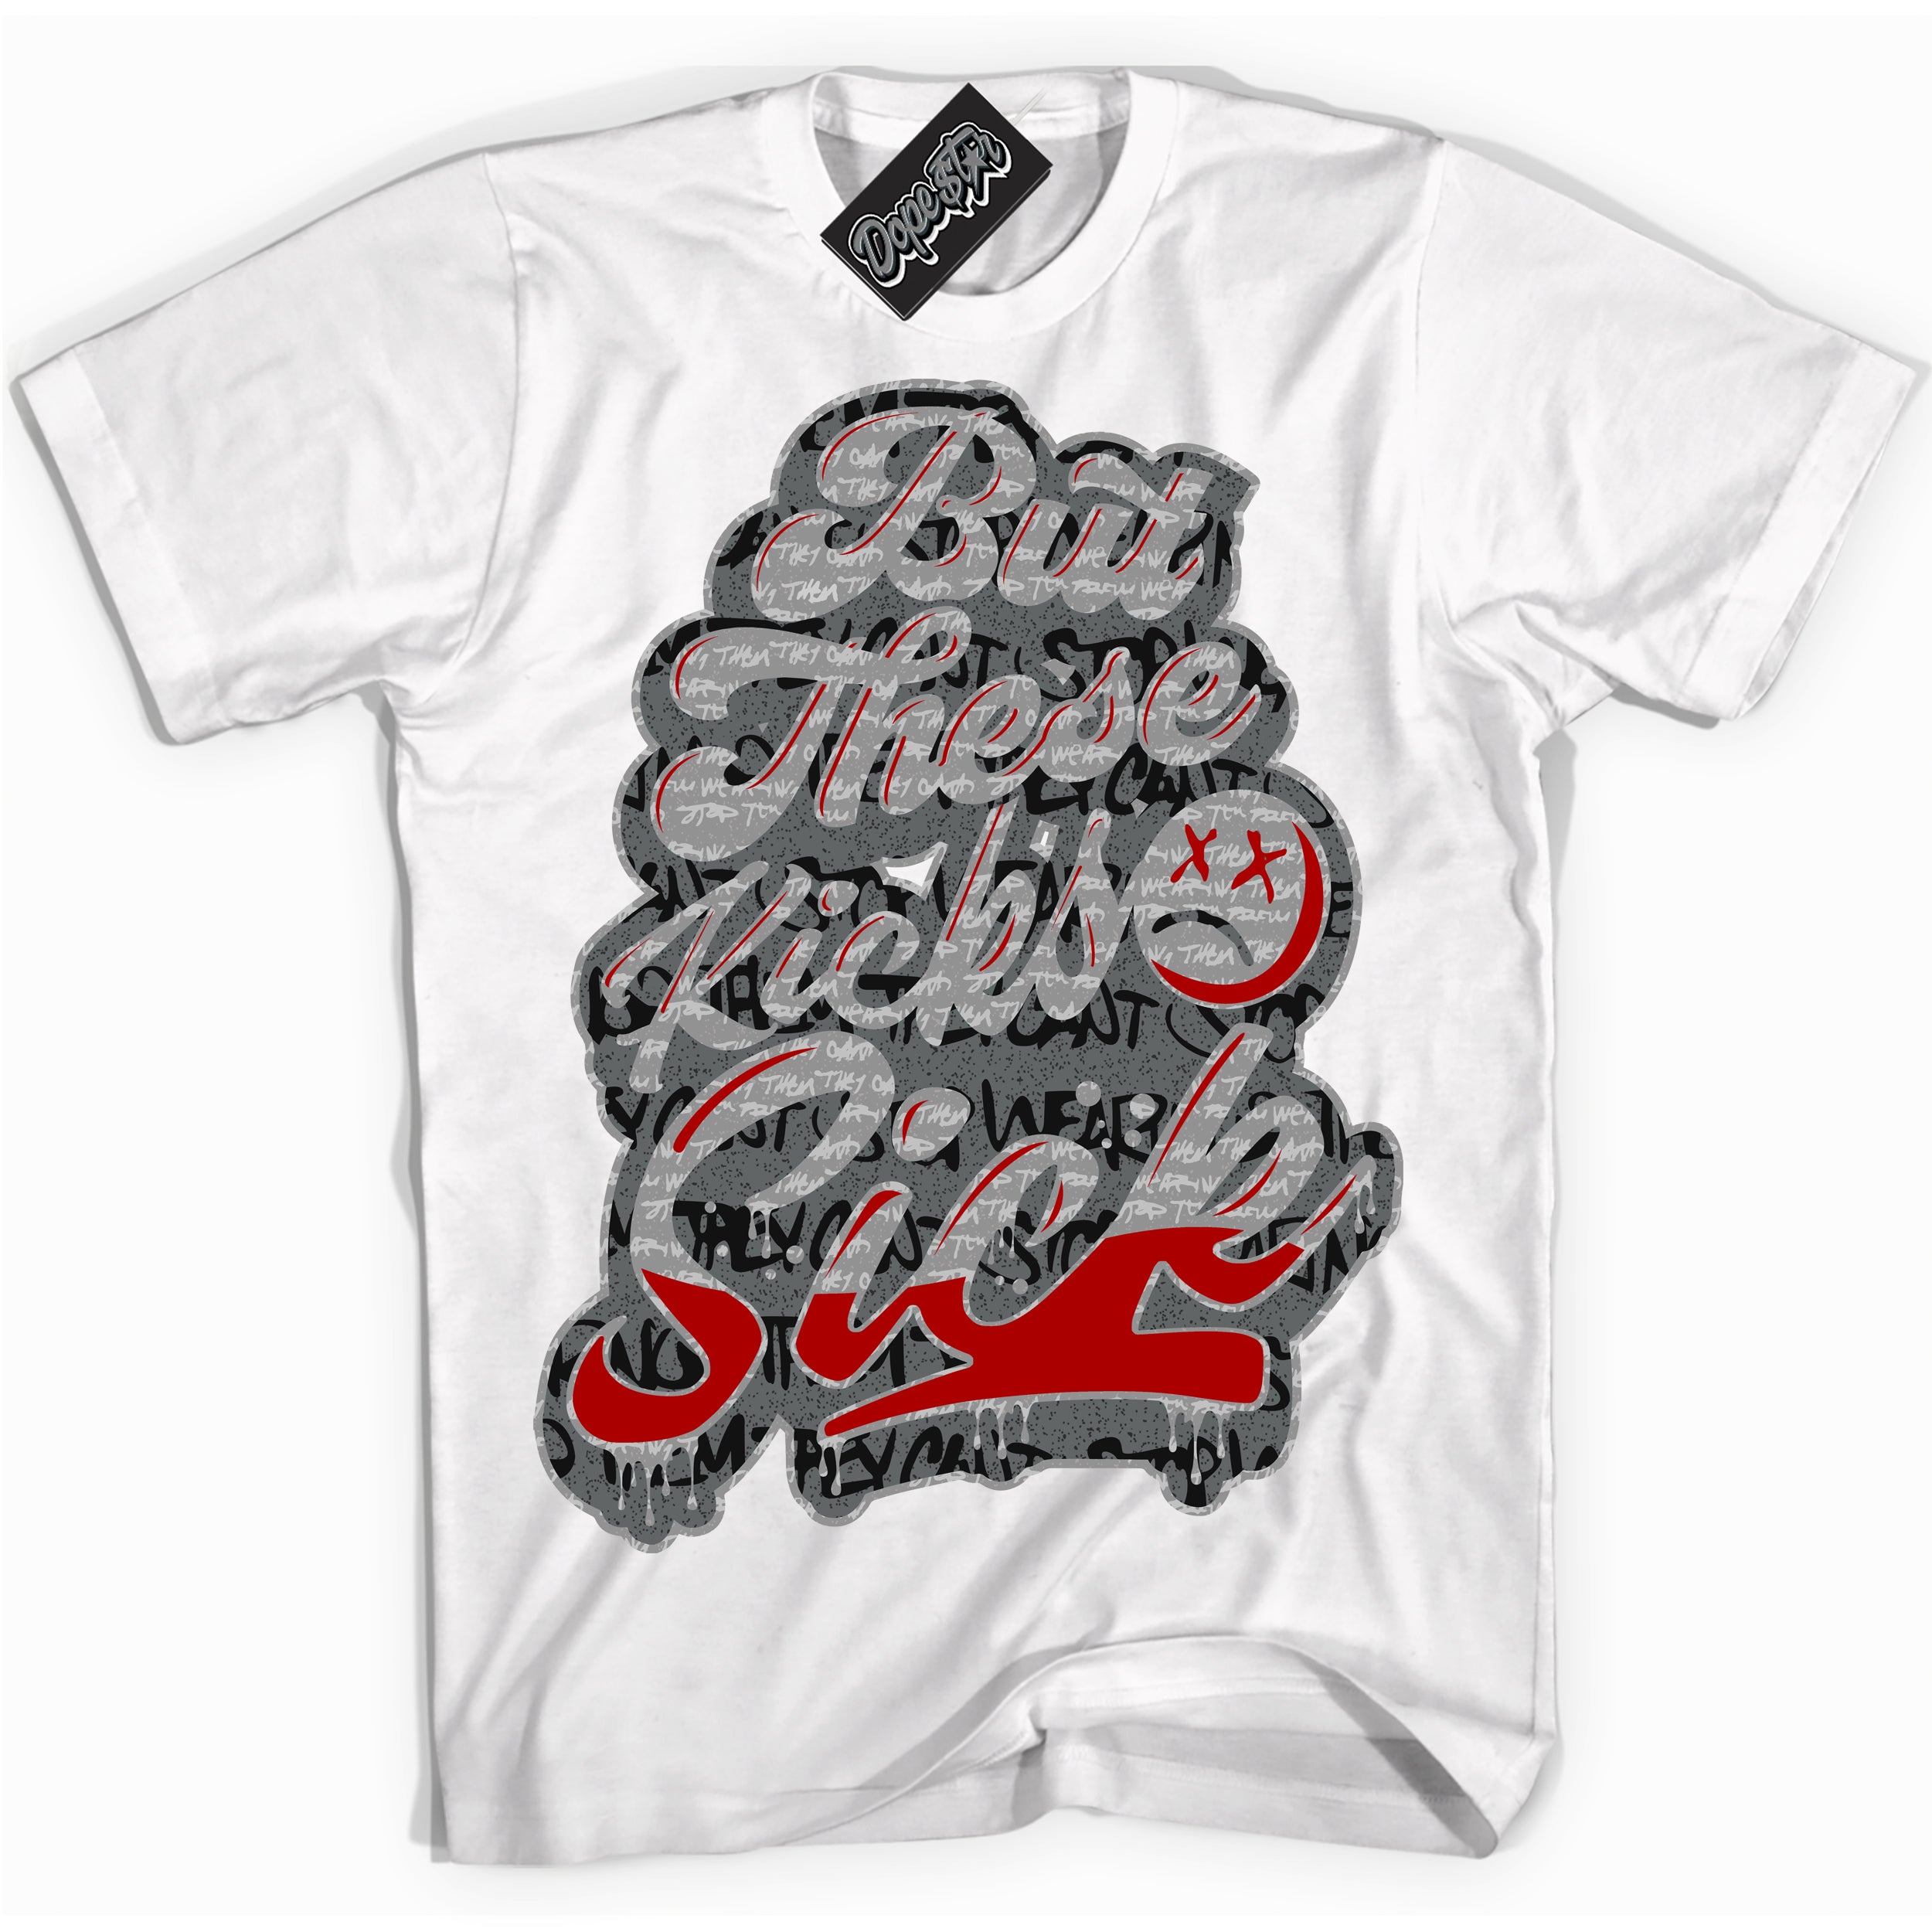 Cool White Shirt with “ Kick Sick ” design that perfectly matches Rebellionaire 1s Sneakers.